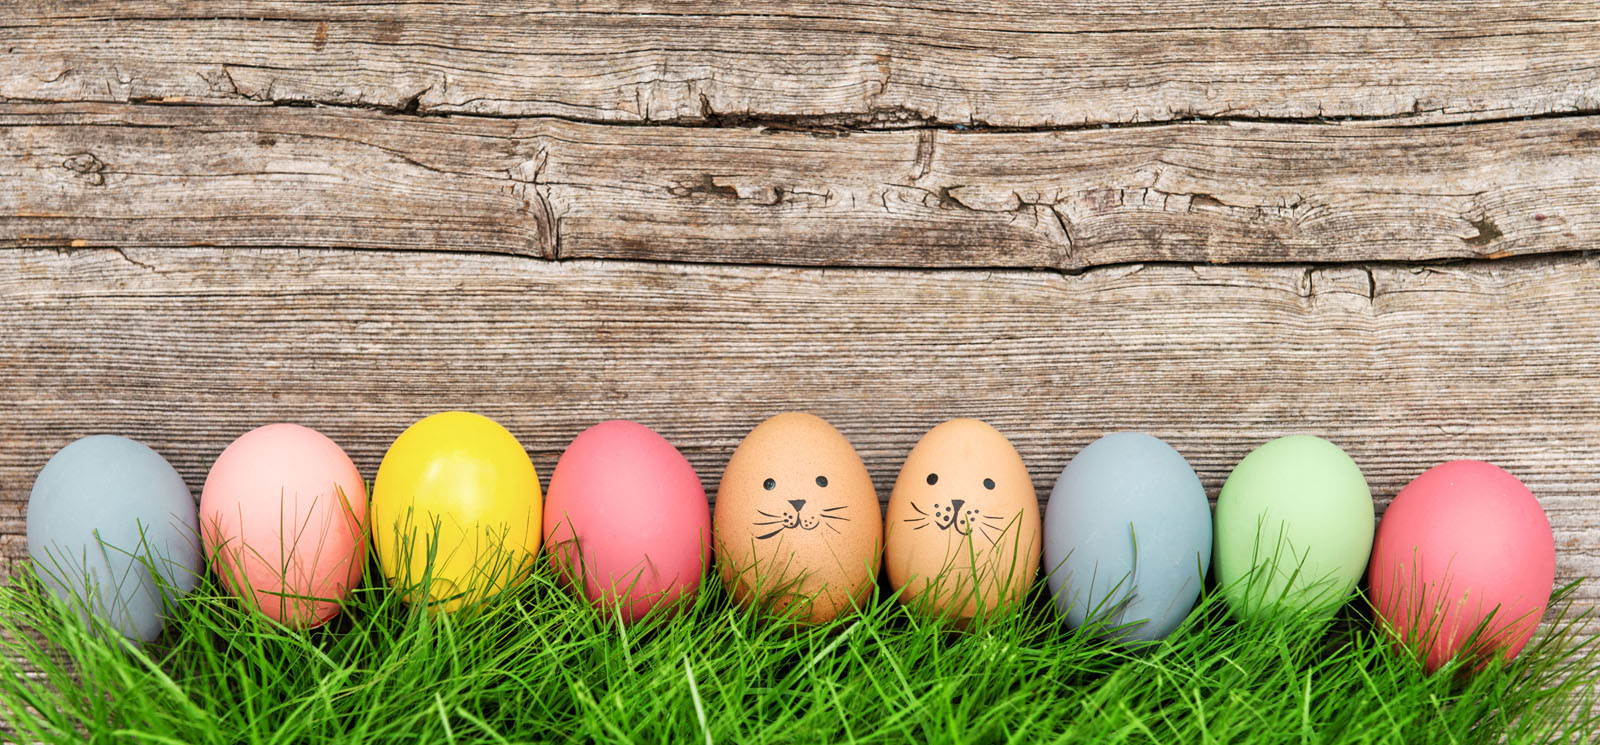 Easter Eggs in Grass with link to coloring contest information.